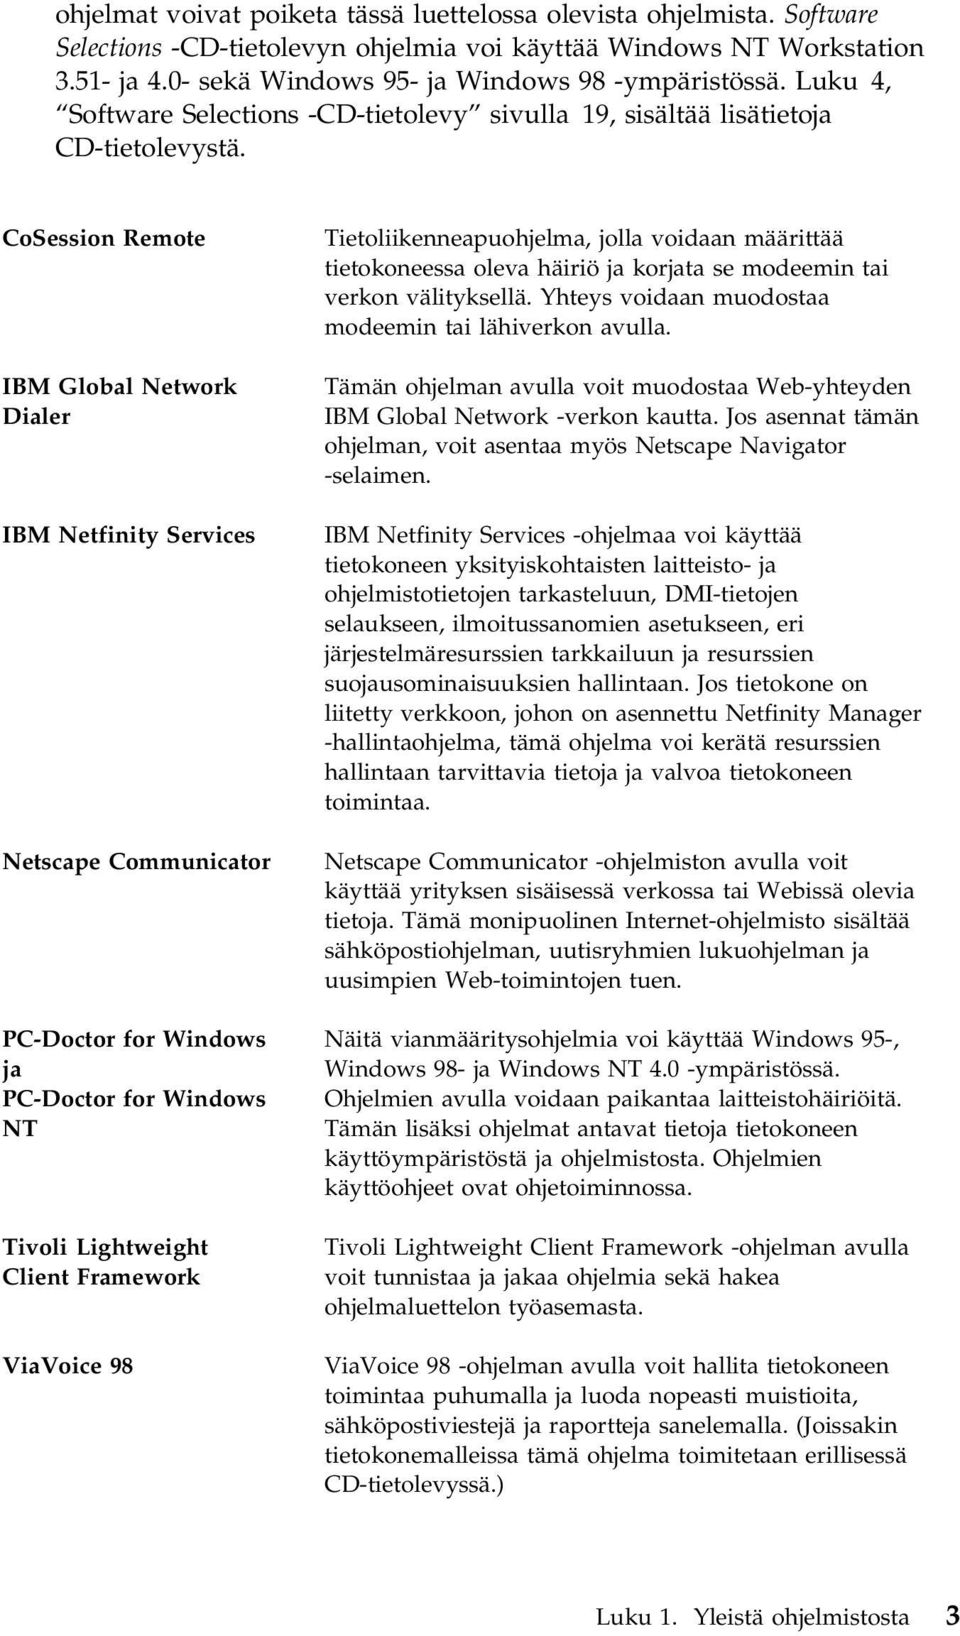 CoSession Remote IBM Global Network Dialer IBM Netfinity Services Netscape Communicator PC-Doctor for Windows ja PC-Doctor for Windows NT Tivoli Lightweight Client Framework ViaVoice 98